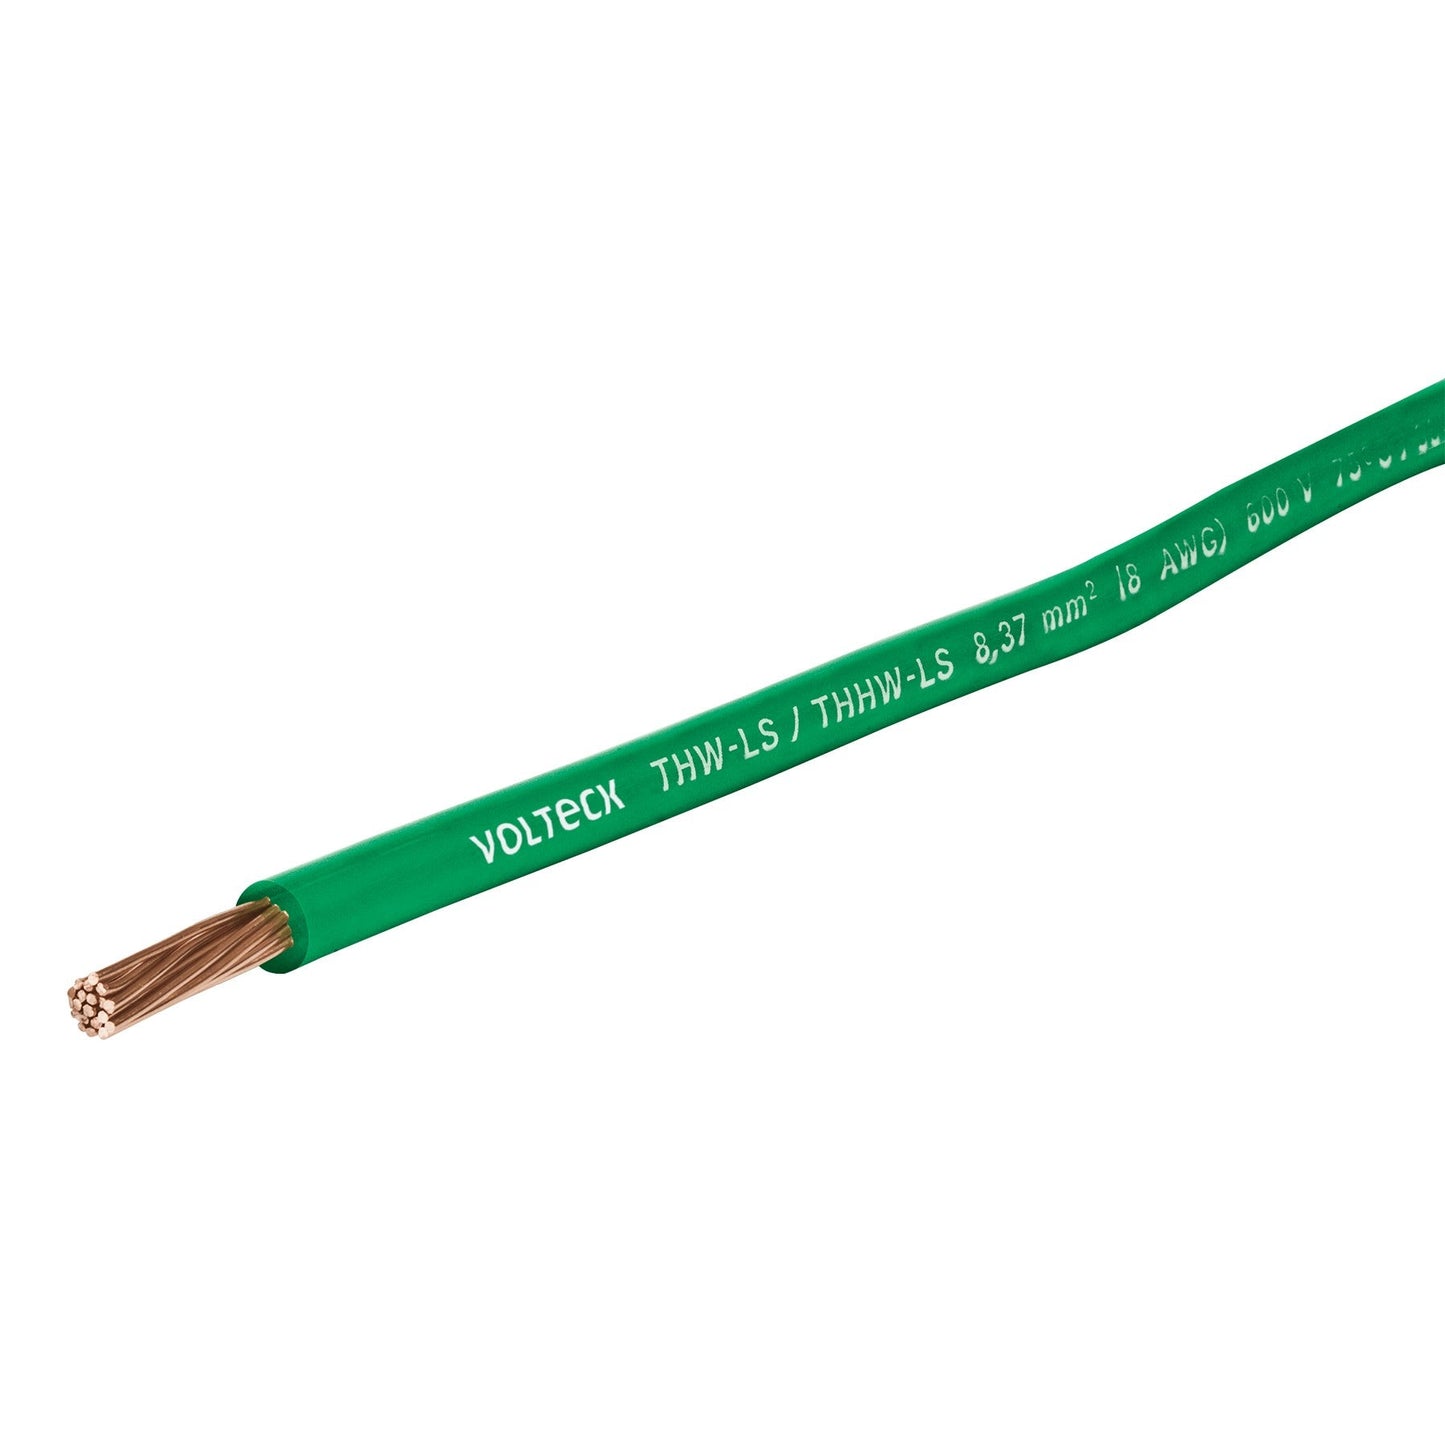 Cable THHW-LS, 8 AWG, color verde rollo 100 m